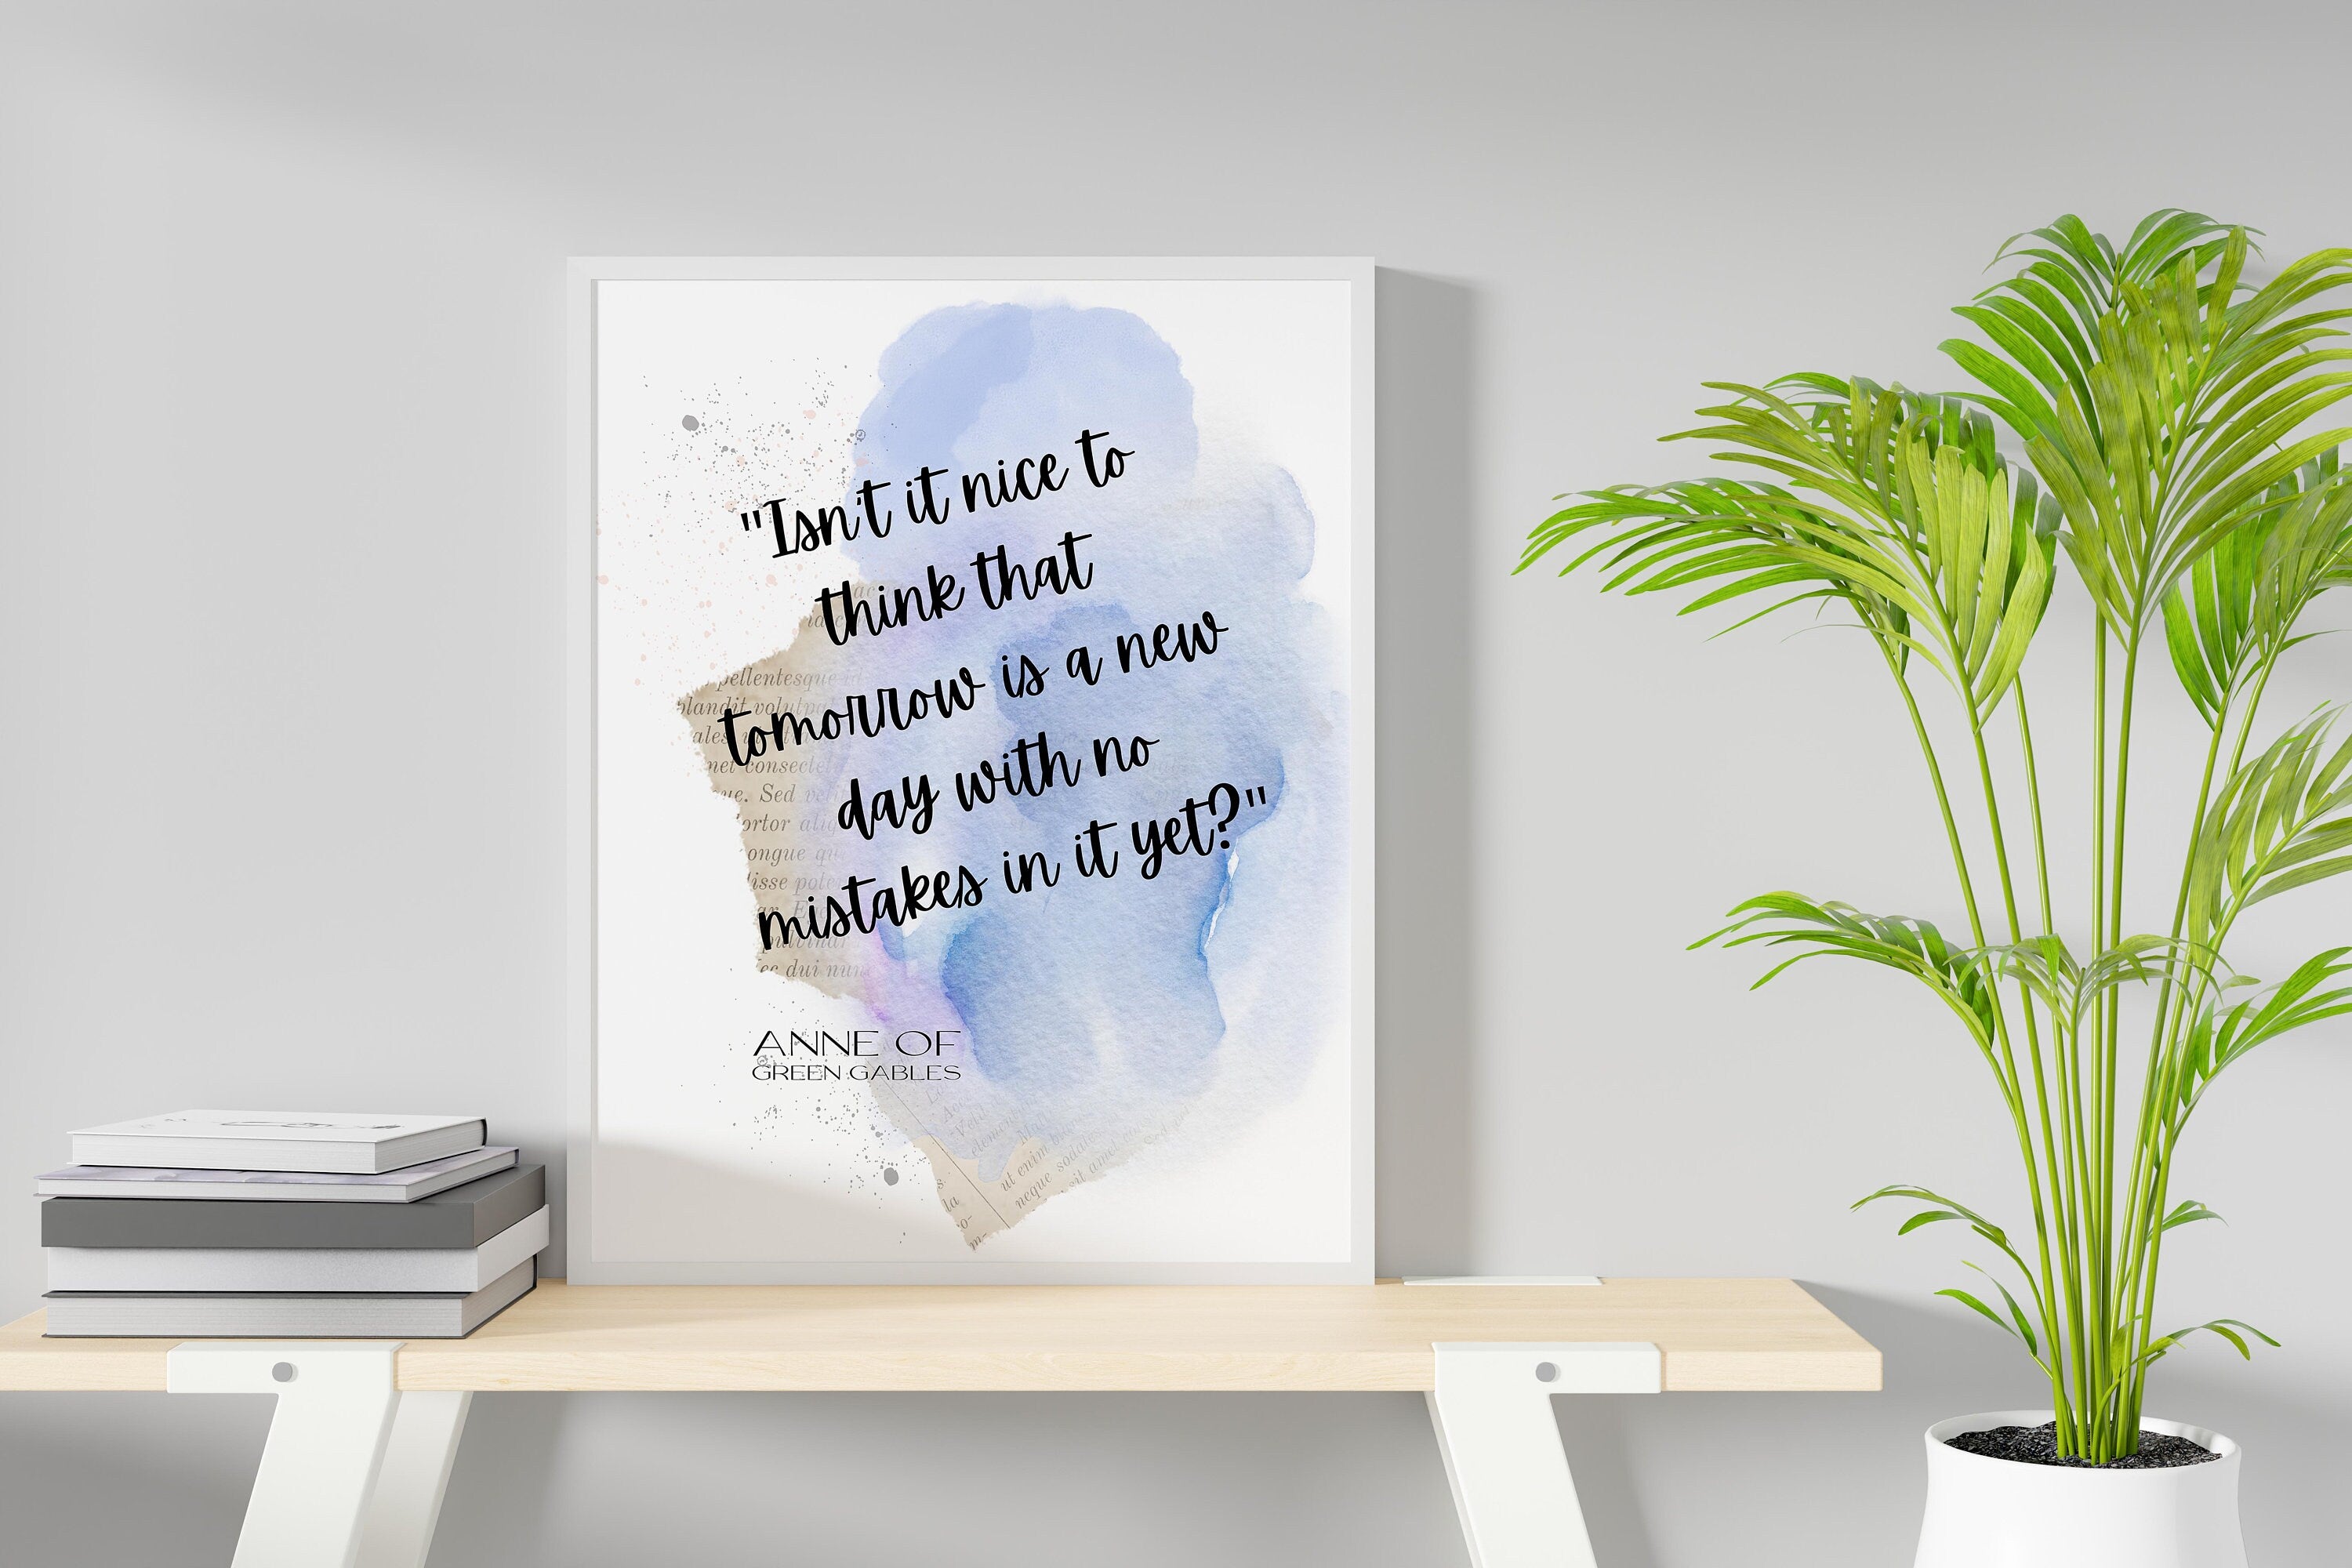 L M Montgomery Book Page Inspirational Wall Art, Anne of Green Gables –  BookQuoteDecor